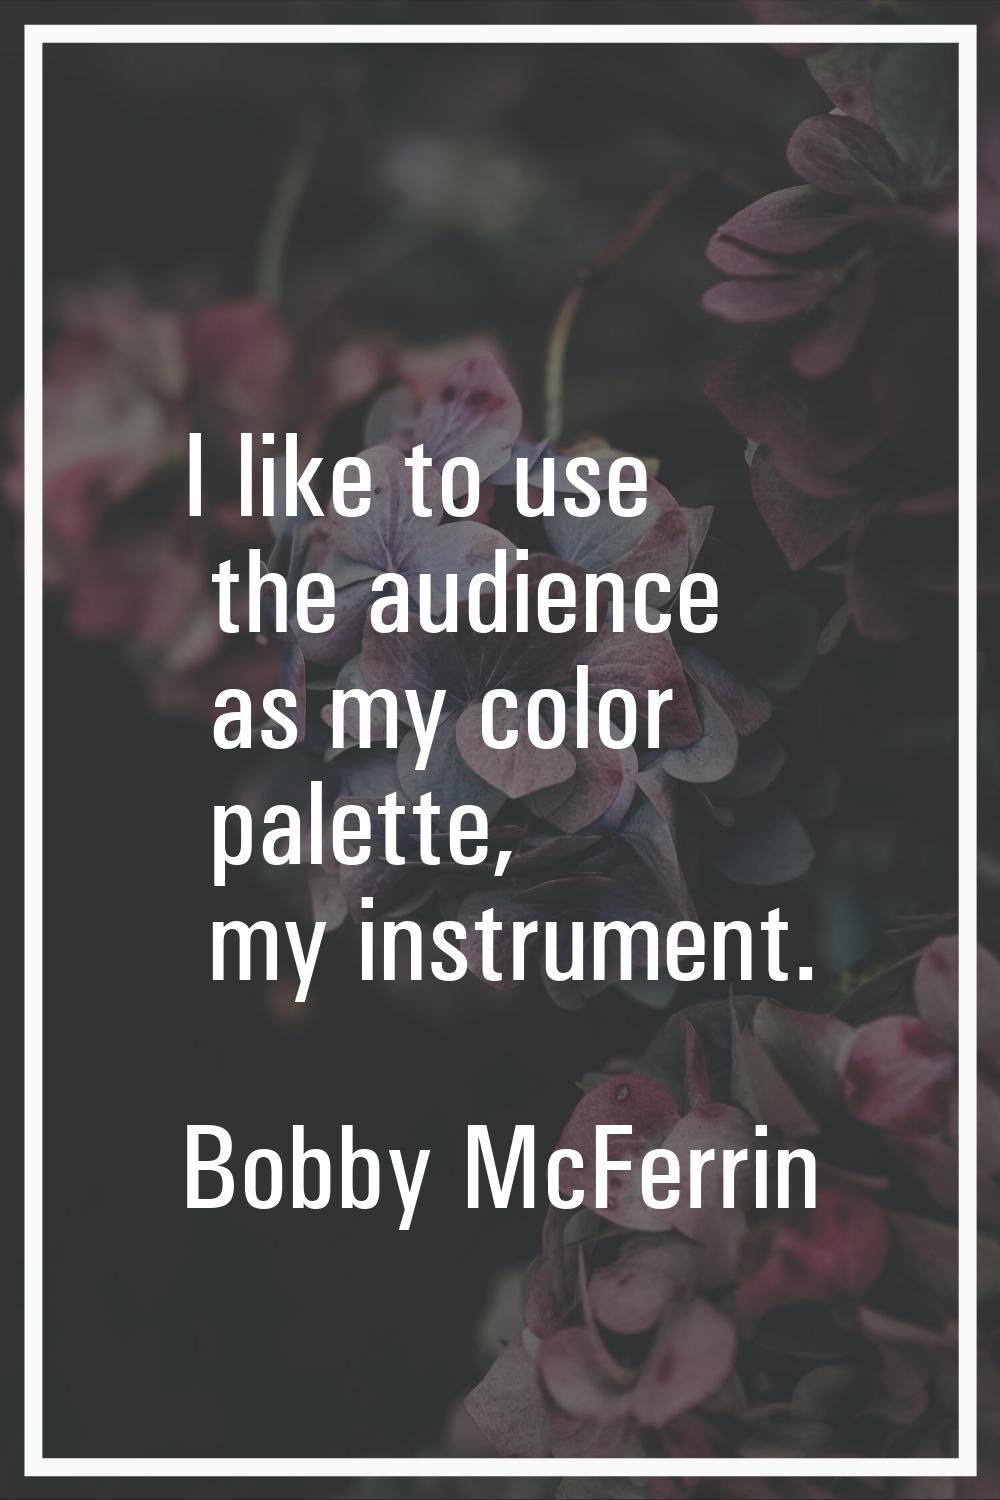 I like to use the audience as my color palette, my instrument.